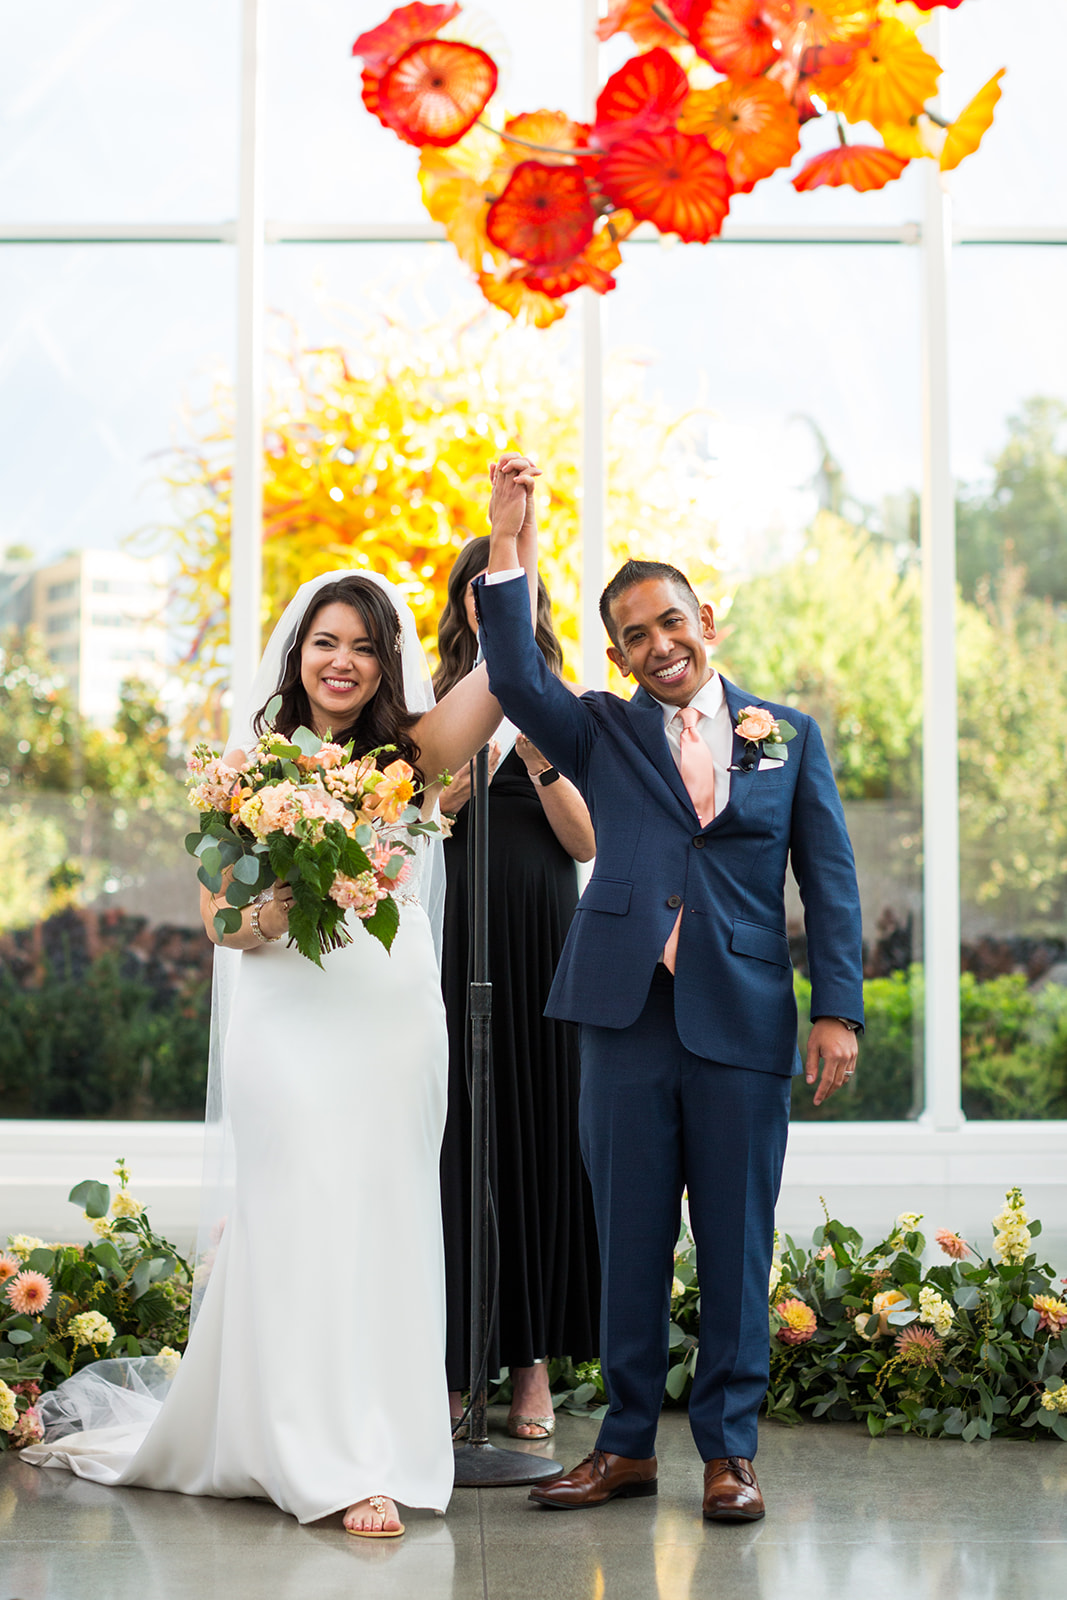 Bride and groom just married at their fall navy blue and burnt orange wedding at Chihuly | Flora Nova Design